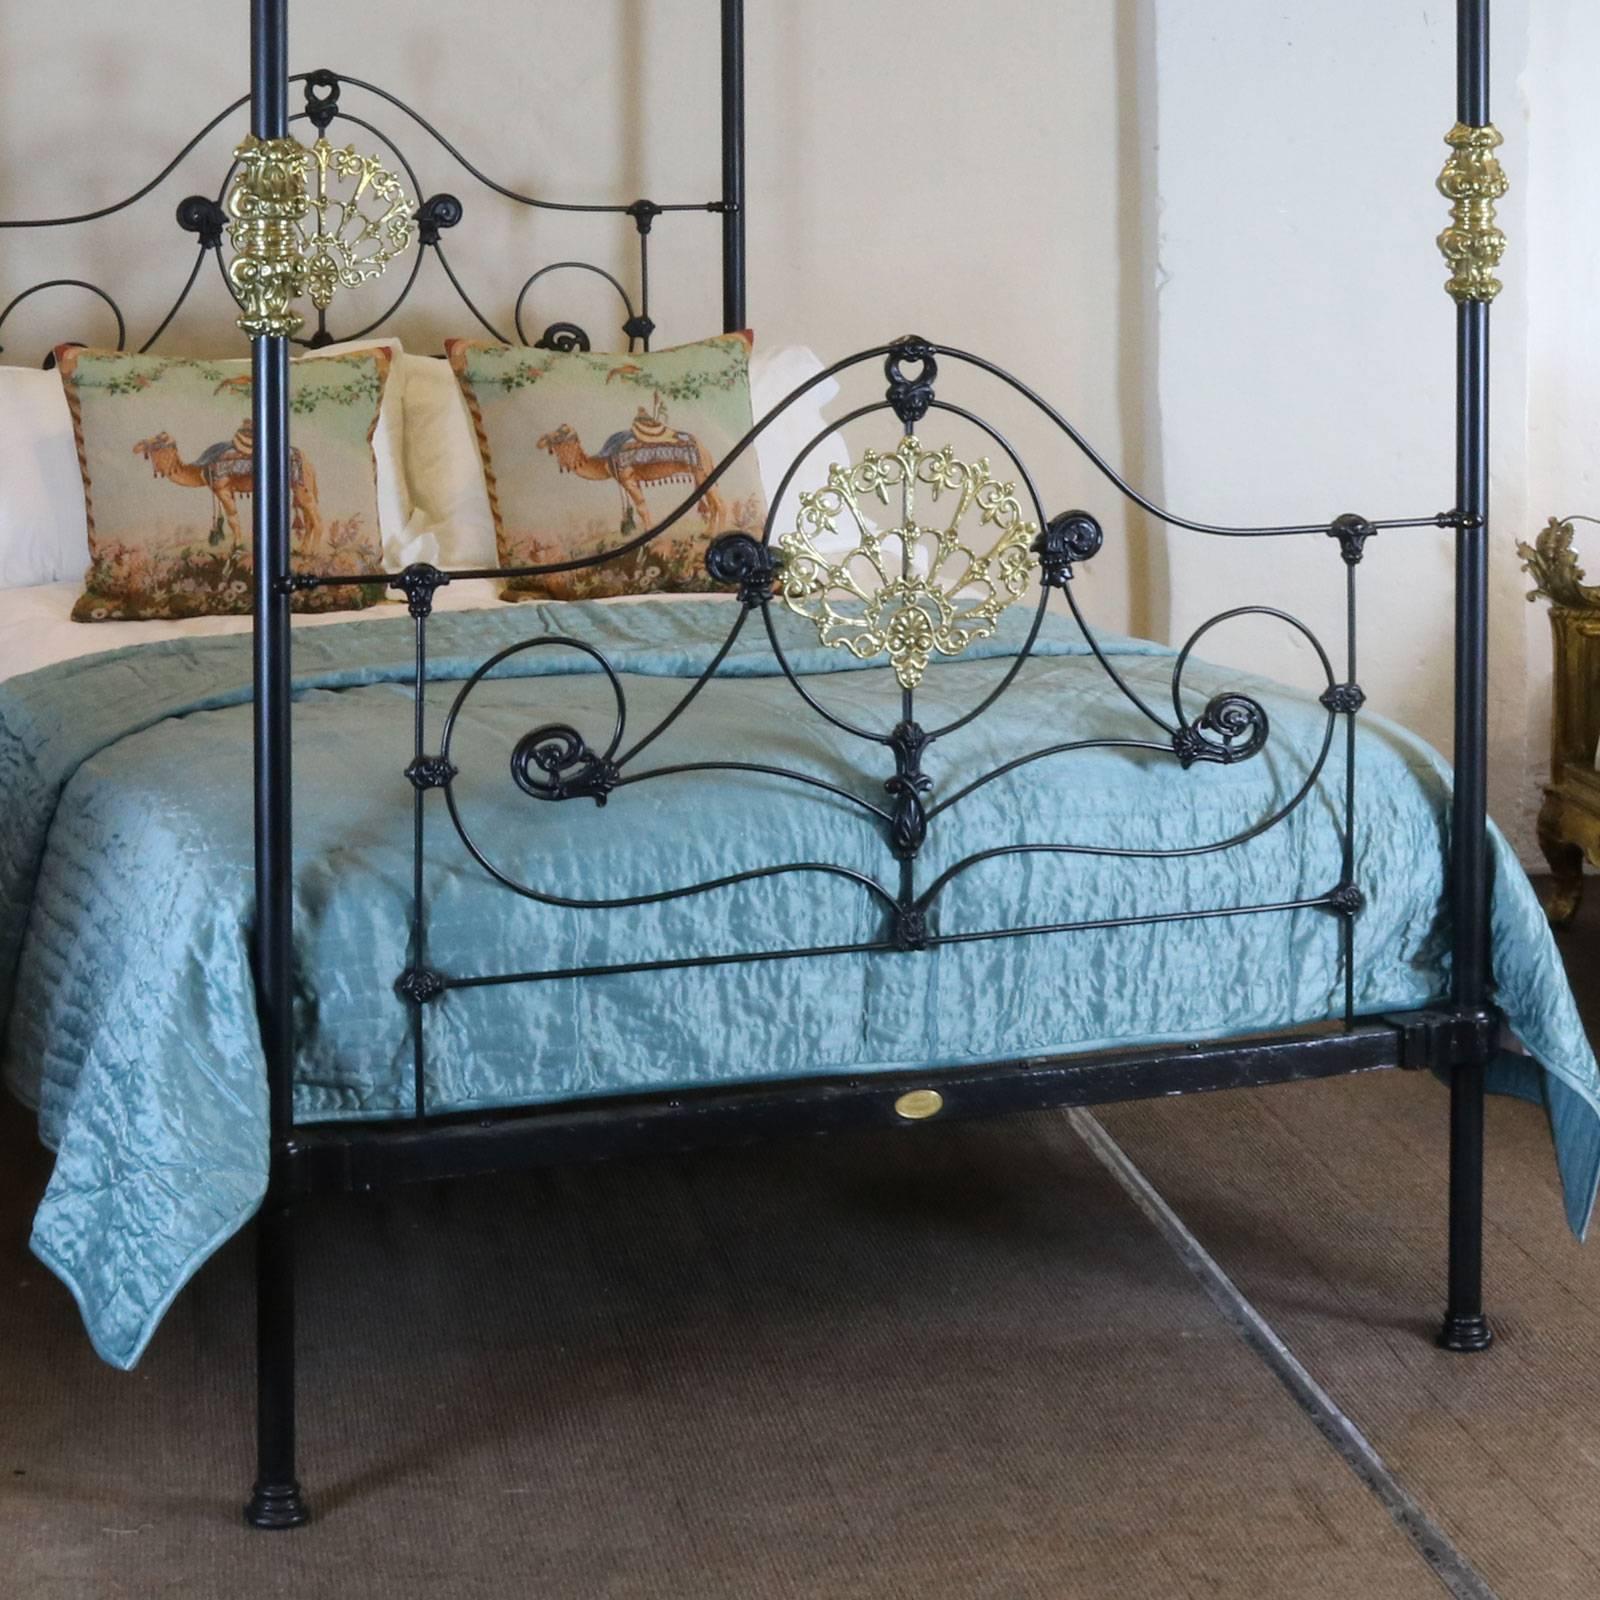 A superb cast iron four poster bed adapted from an original mid-Victorian frame dating back to 1880 with cast central brass plaque, collars and finials. This four poster comes with the straight canopy as shown in the photographs or an arched canopy